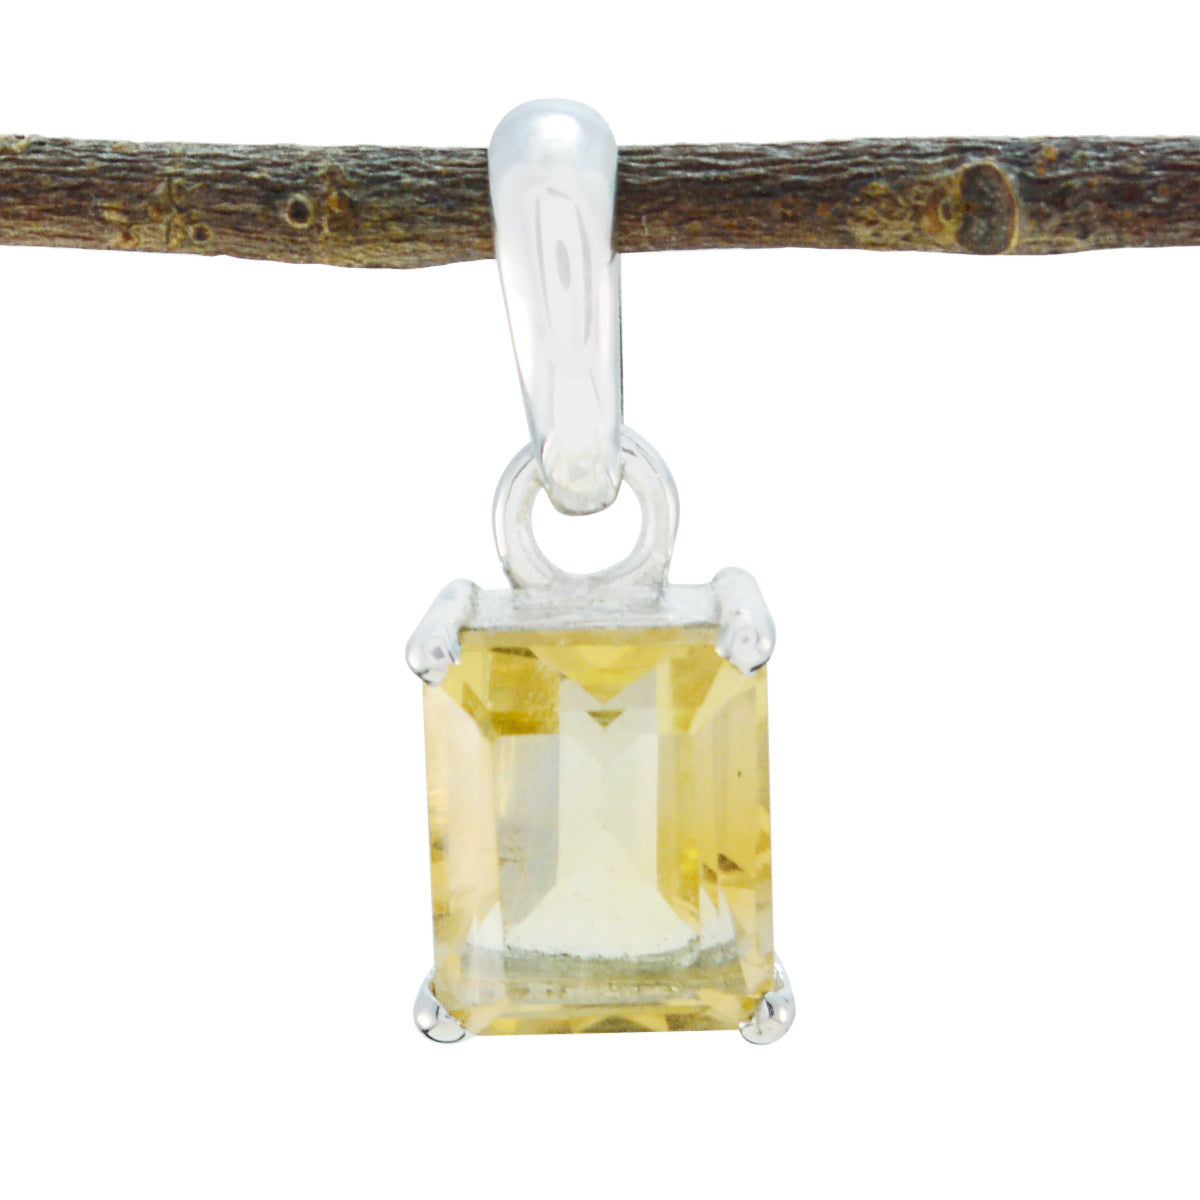 Riyo Genuine Gems Octogon Faceted Yellow Citrine Solid Silver Pendants gift for thanks giving